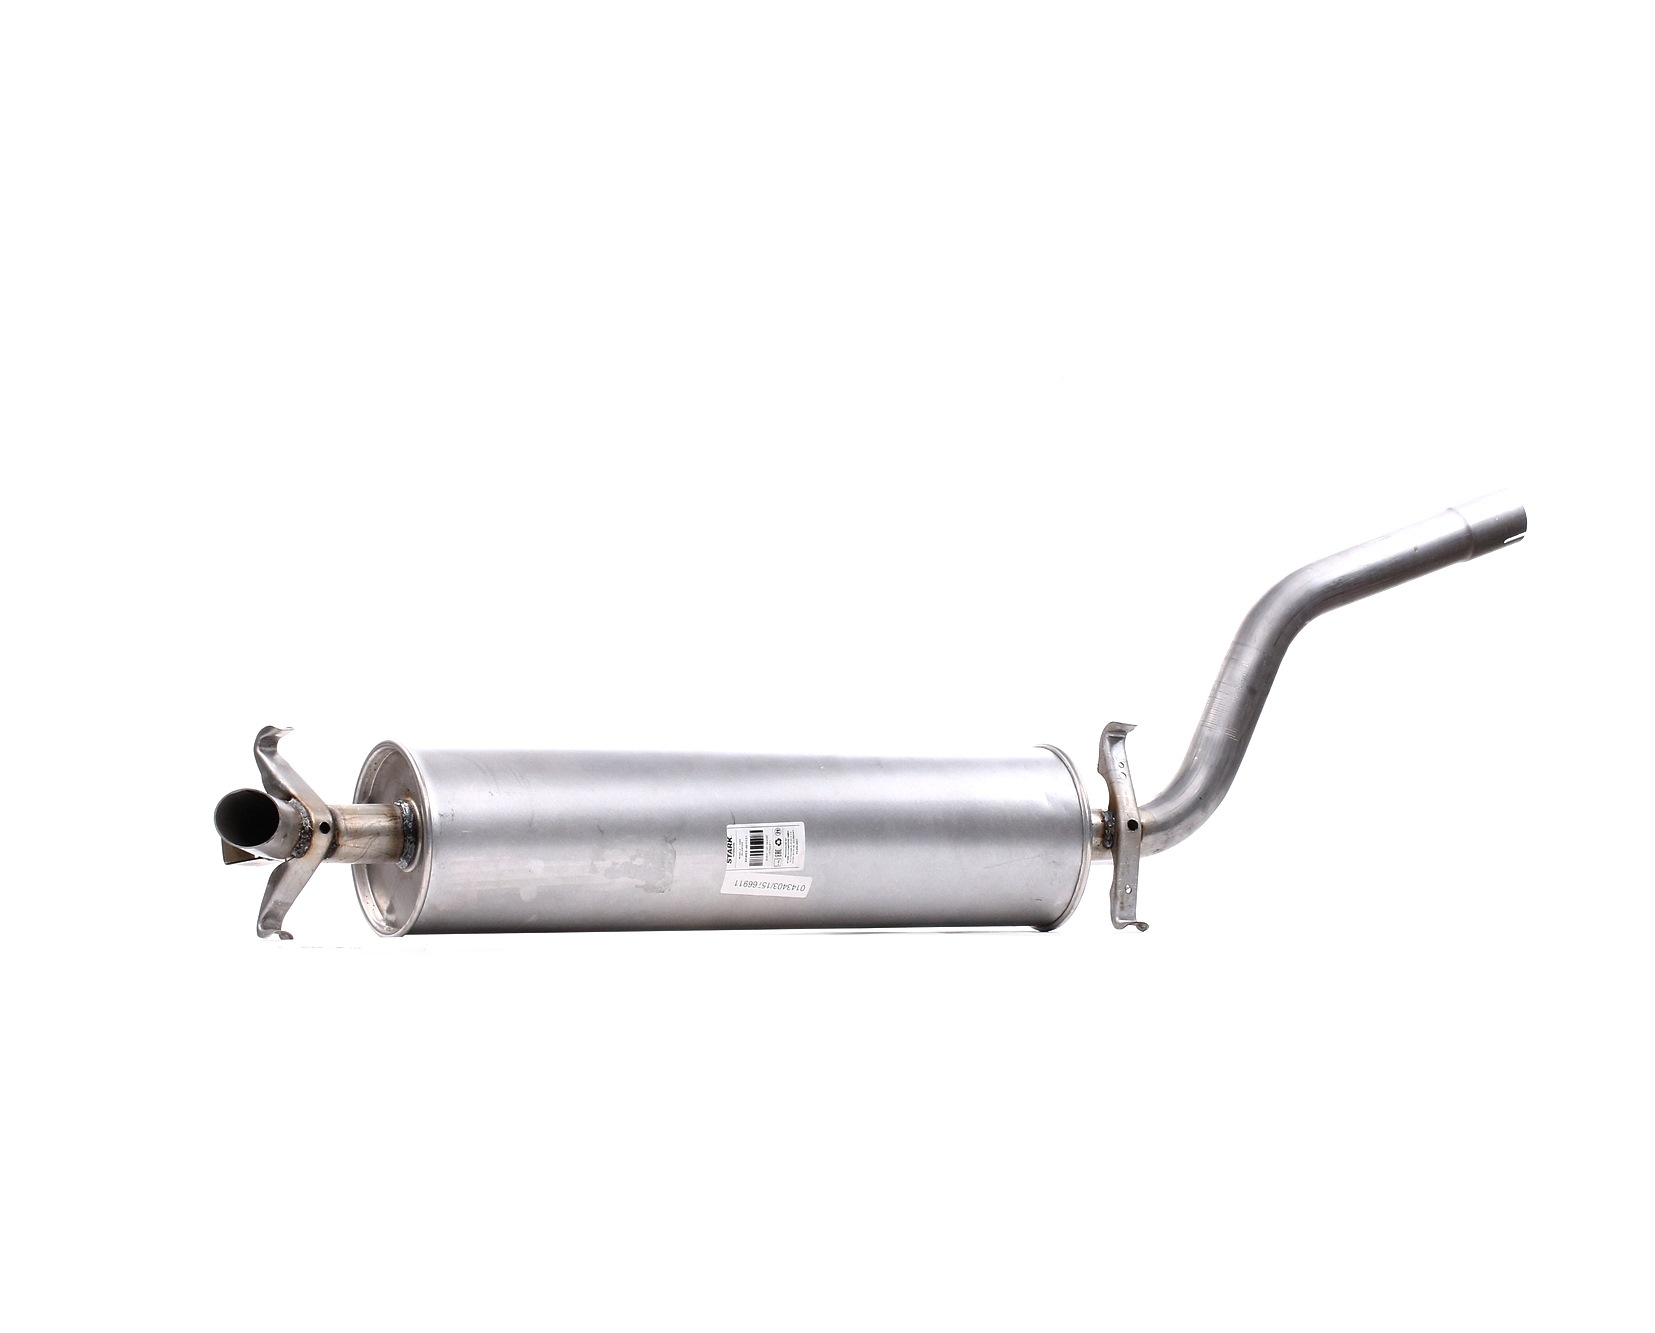 Original SKMES-4911121 STARK Middle silencer experience and price